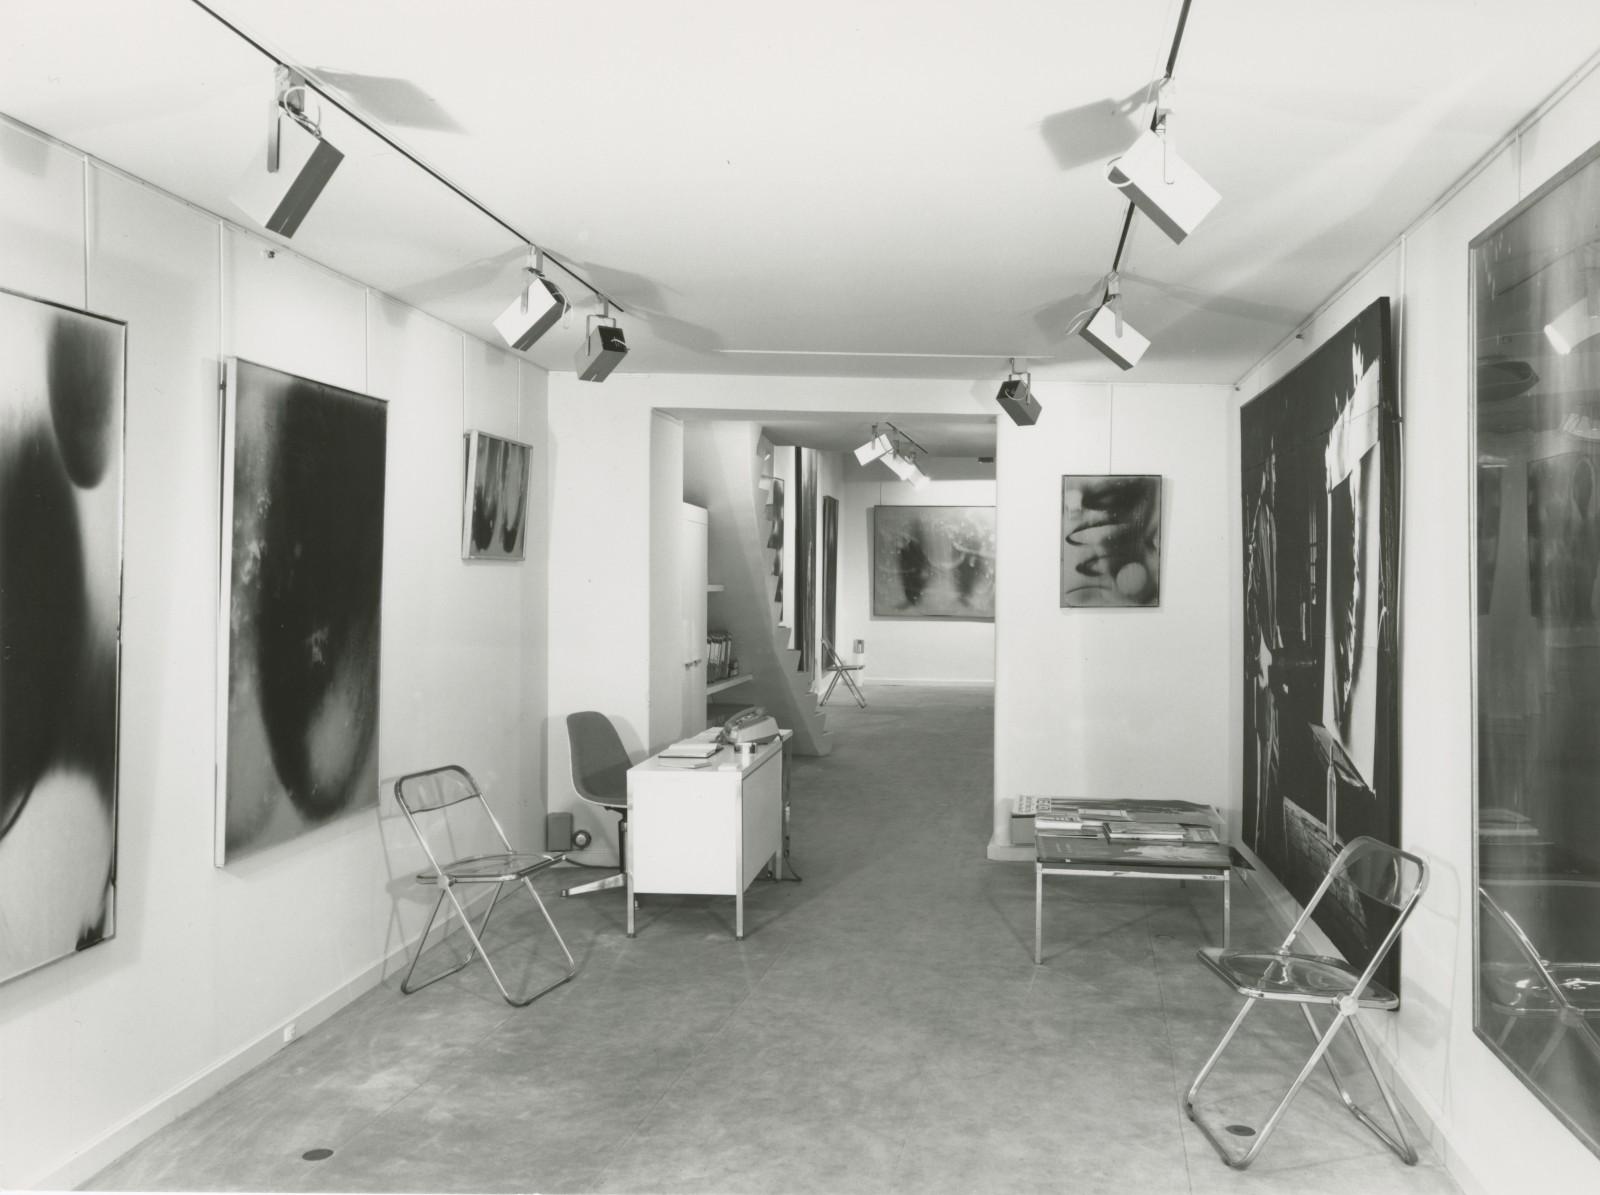 View of the exhibition, "Yves Klein, Feux", Galerie Karl Flinker, 1976